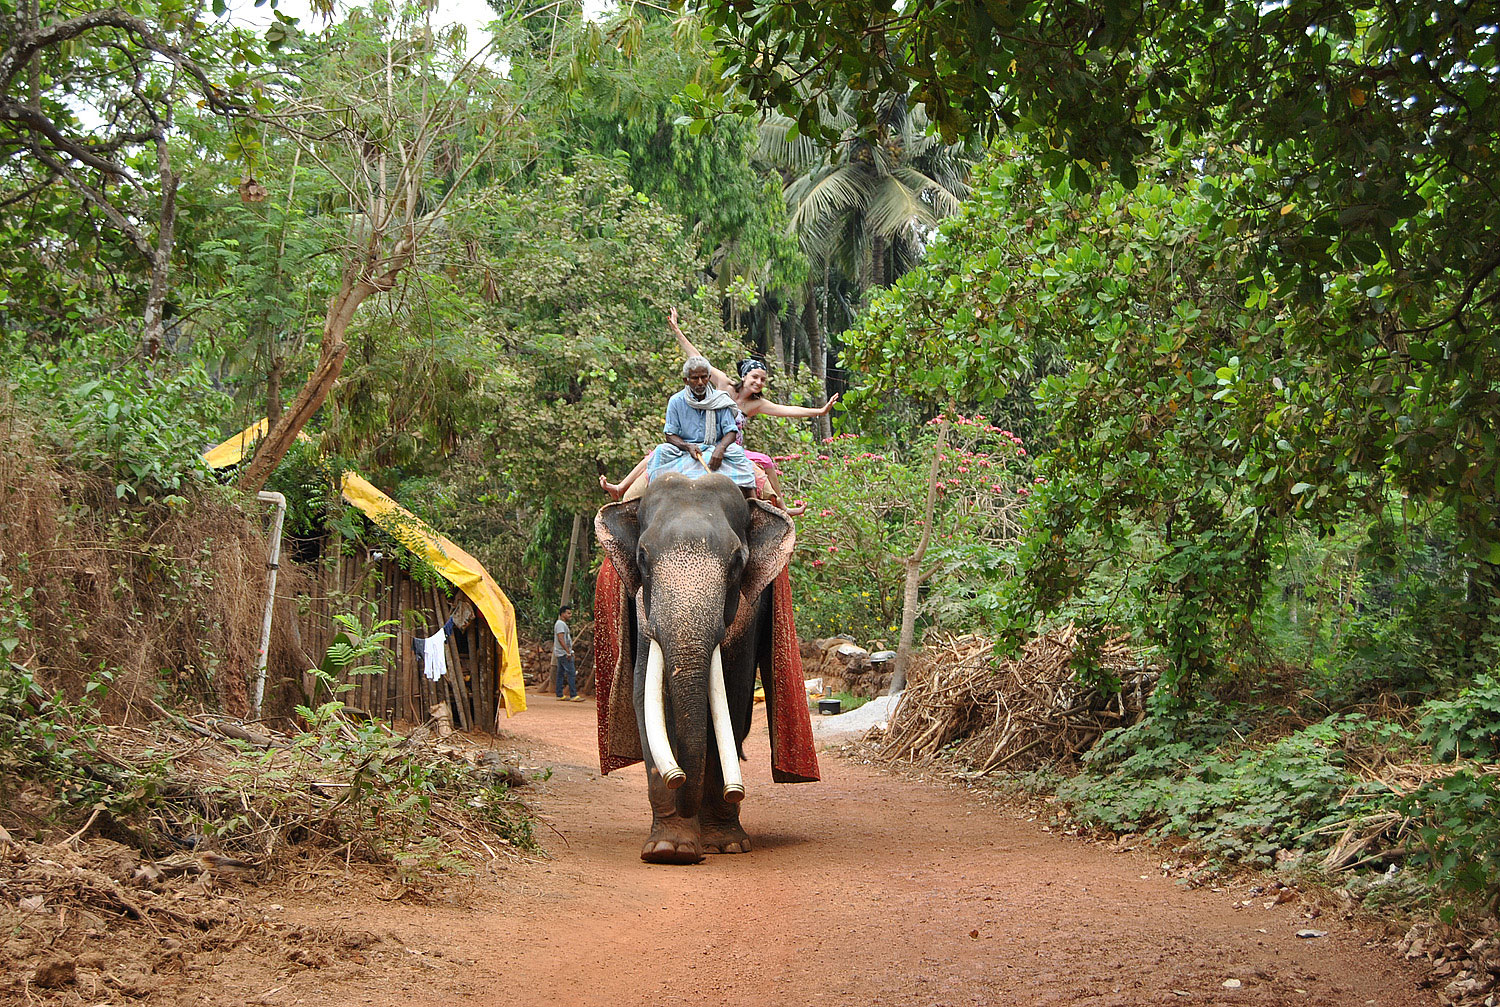 Chantal's first elephant ride ever